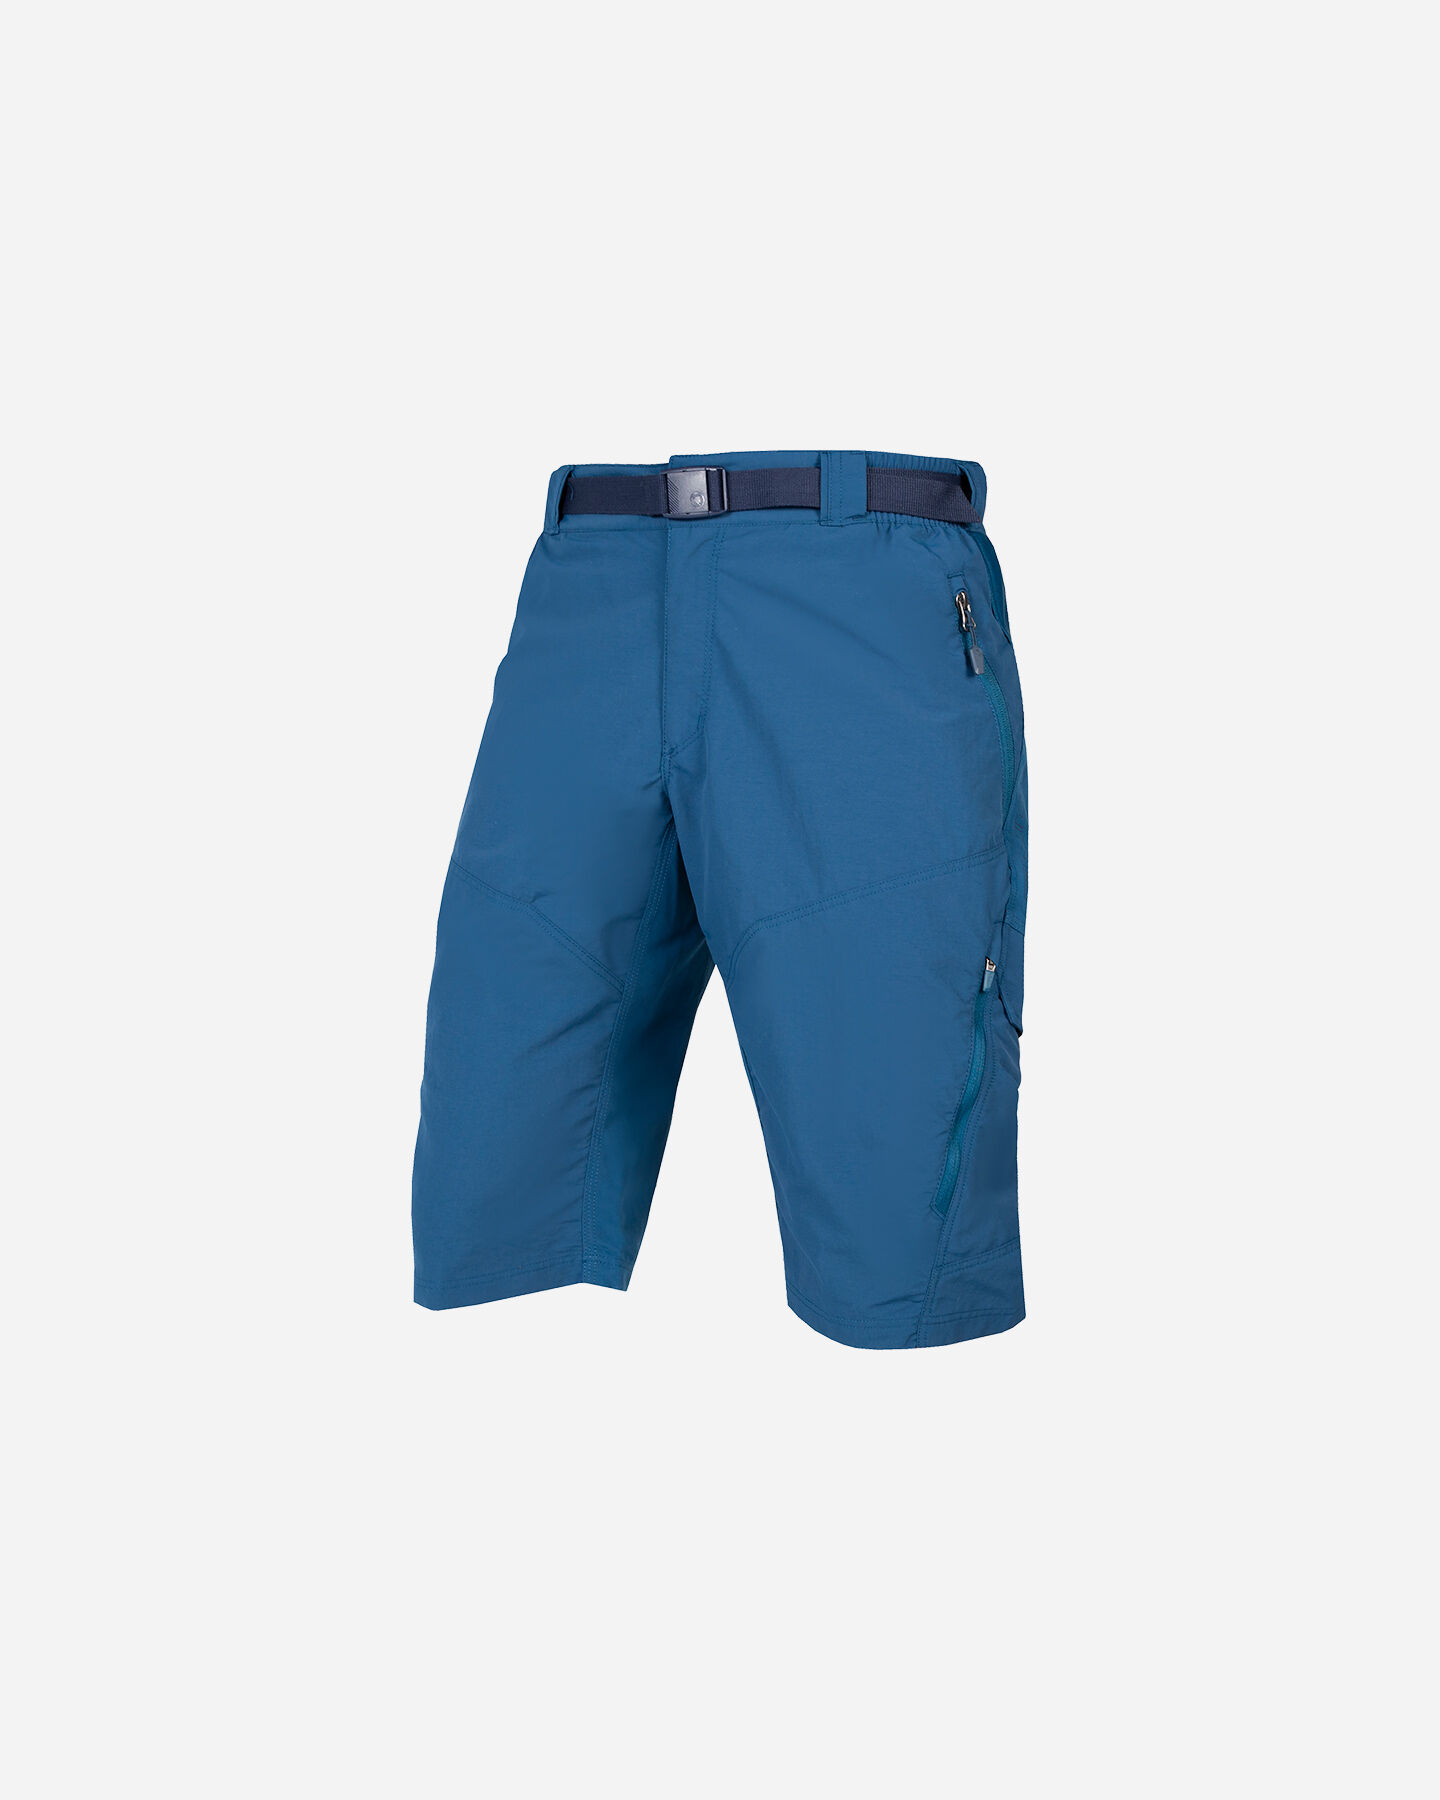  Short ciclismo ENDURA HUMMVEE WITH LINER M S4123646|1|L scatto 0